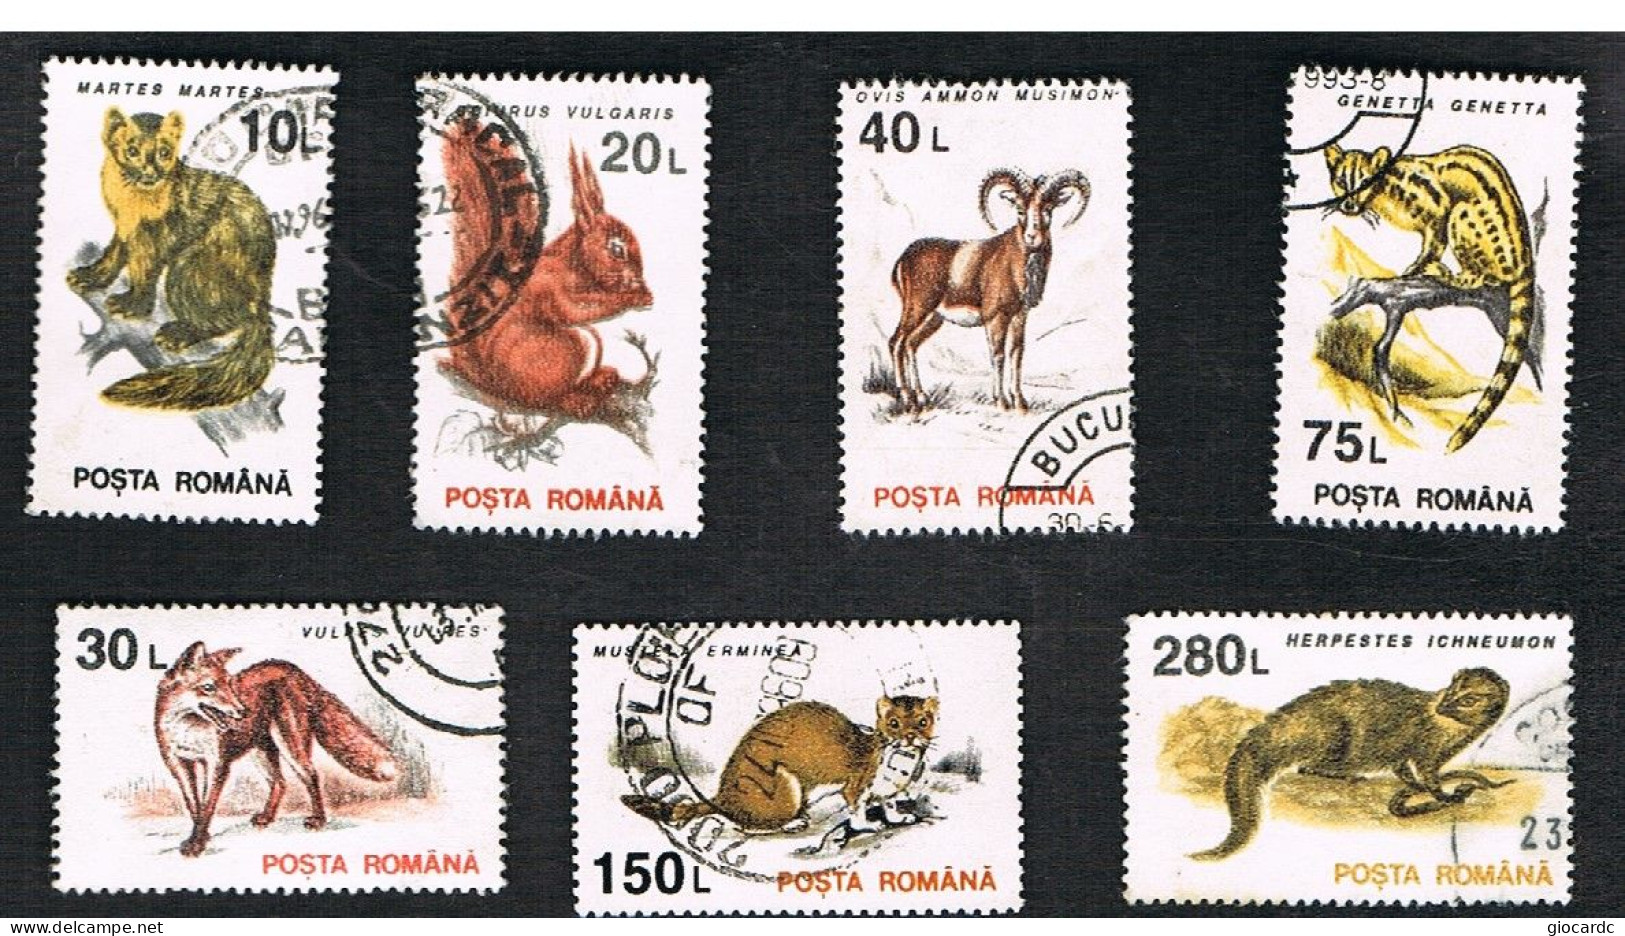 ROMANIA - SG 5533.5542  - 1995  CURRENT SERIE: ANIMALS   (7 STAMPS OF THE SET  ON WHITE PAPER)  - USED ° - Usado